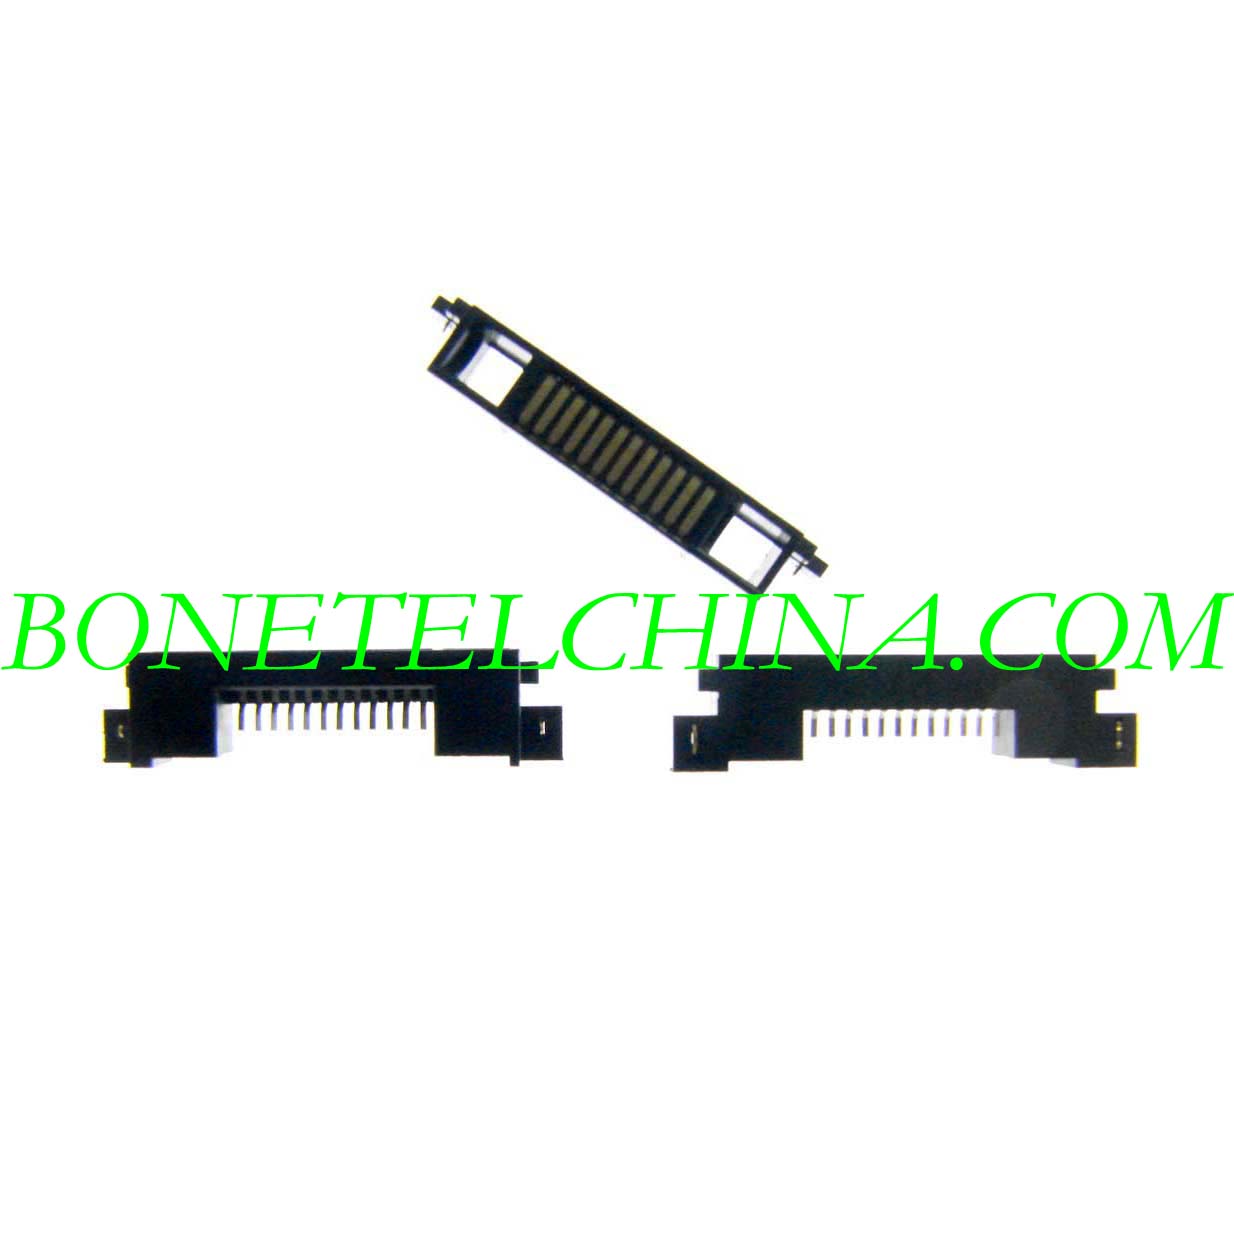 Mobile Phone Charger Connector for Sony Ericsson K550